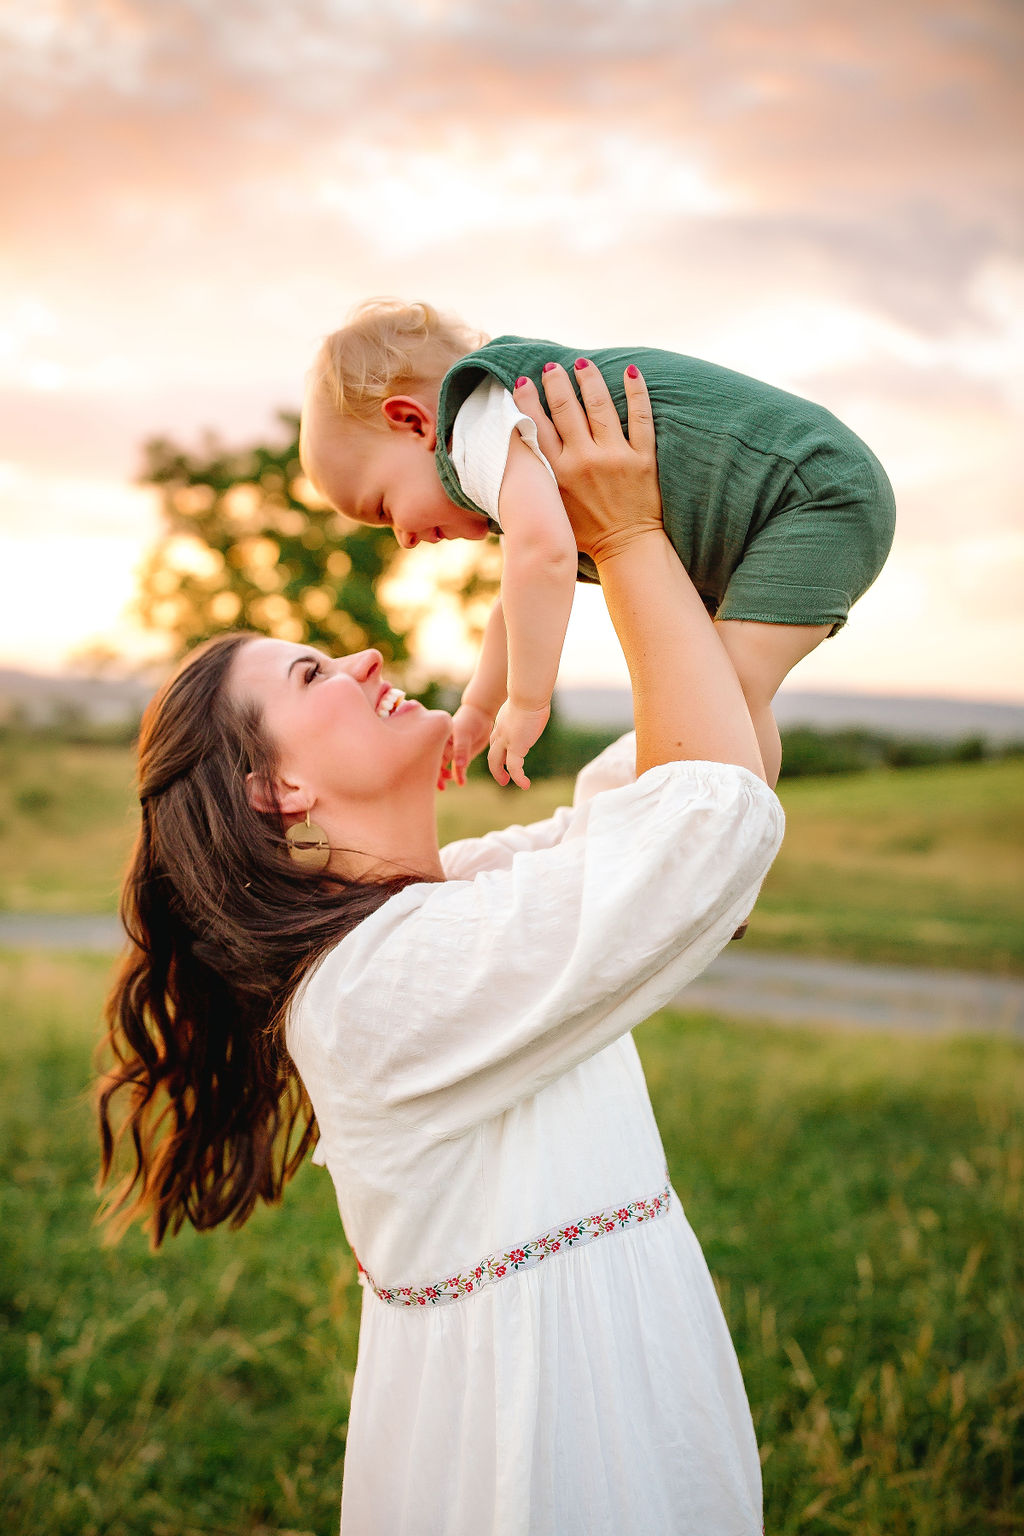 A mother in a white dress playing in a park at sunset by lifting her toddler above her head occupational therapy harrisonburg va